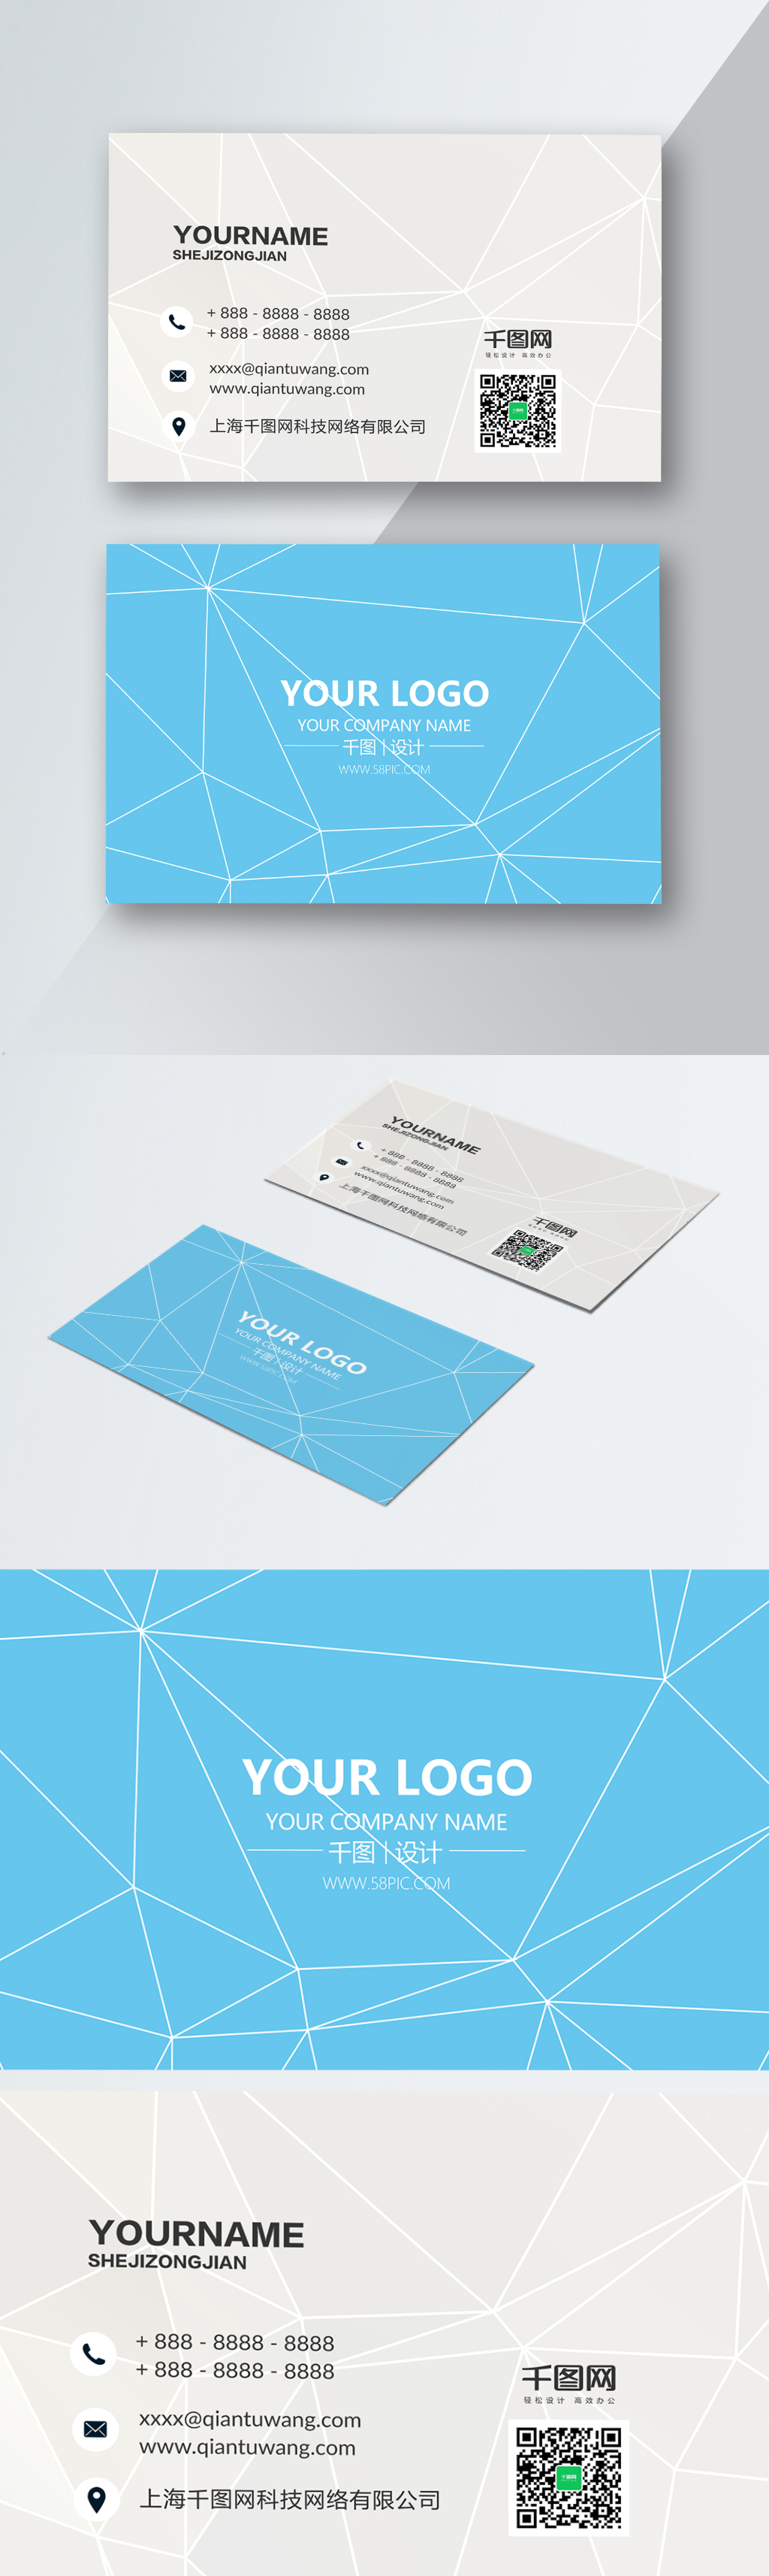 Download Yellow Creative Business Card Design Template Image Picture Free Download 400727796 Lovepik Com PSD Mockup Templates